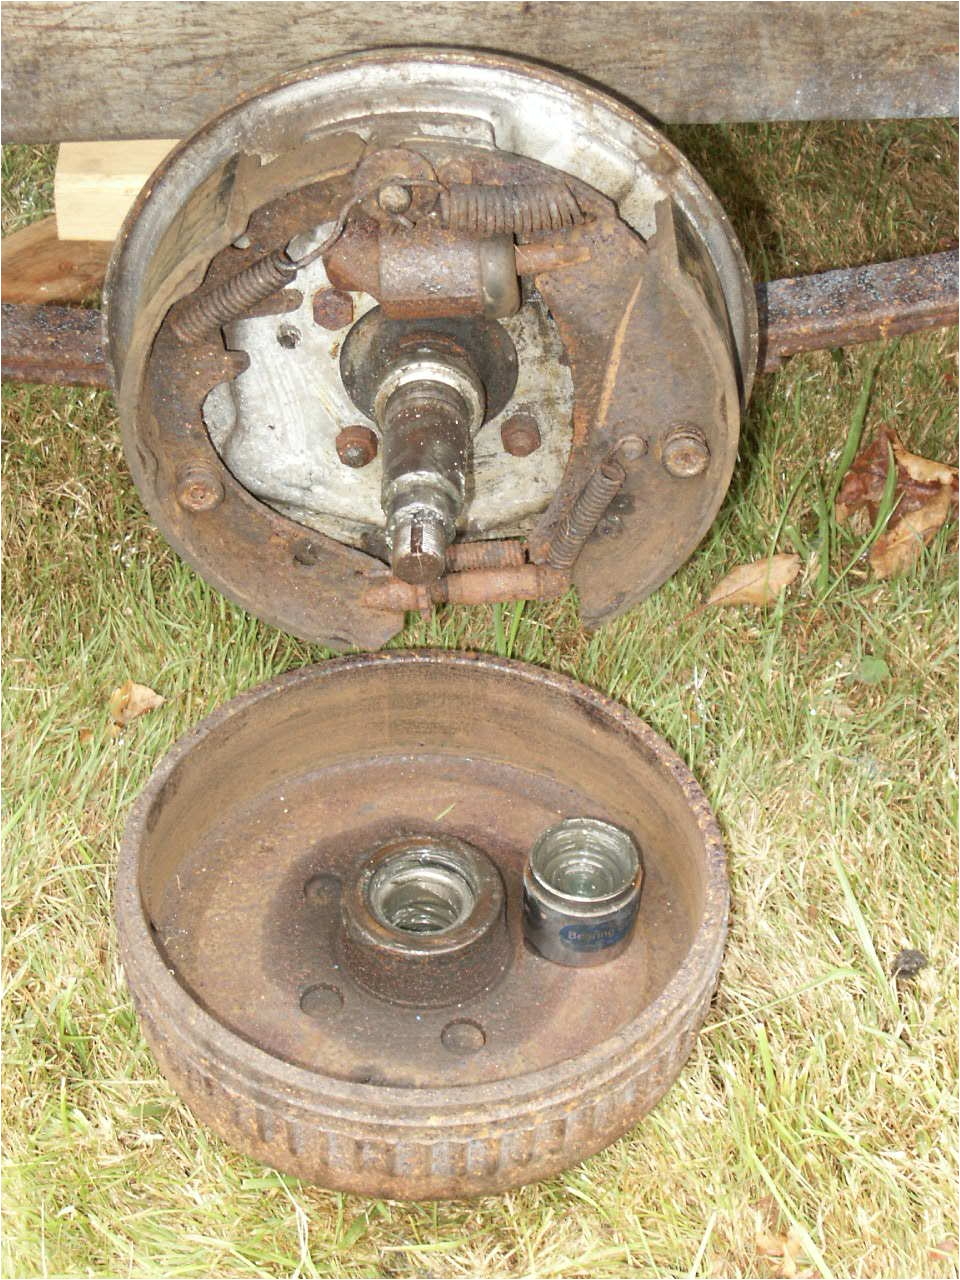 this tandem right rear unit has a frozen wheel cylinder that is questionable whether it can be salvage this brake unit will need extensive cleaning a